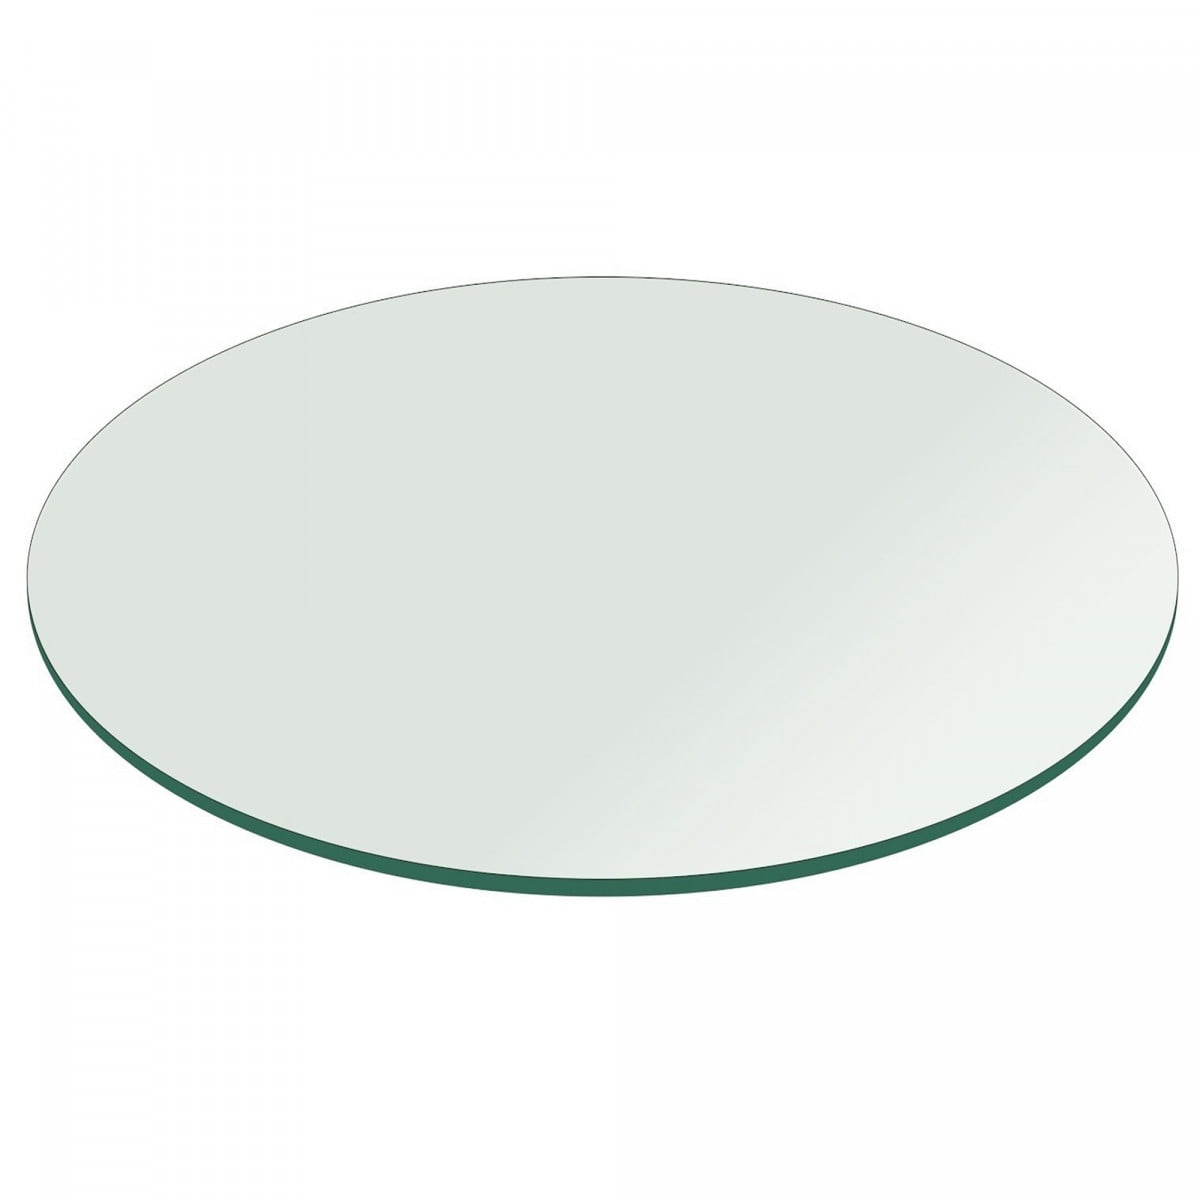 42 Inch Round Glass Table Top 1 4, 60 Inch Round Table Top Only